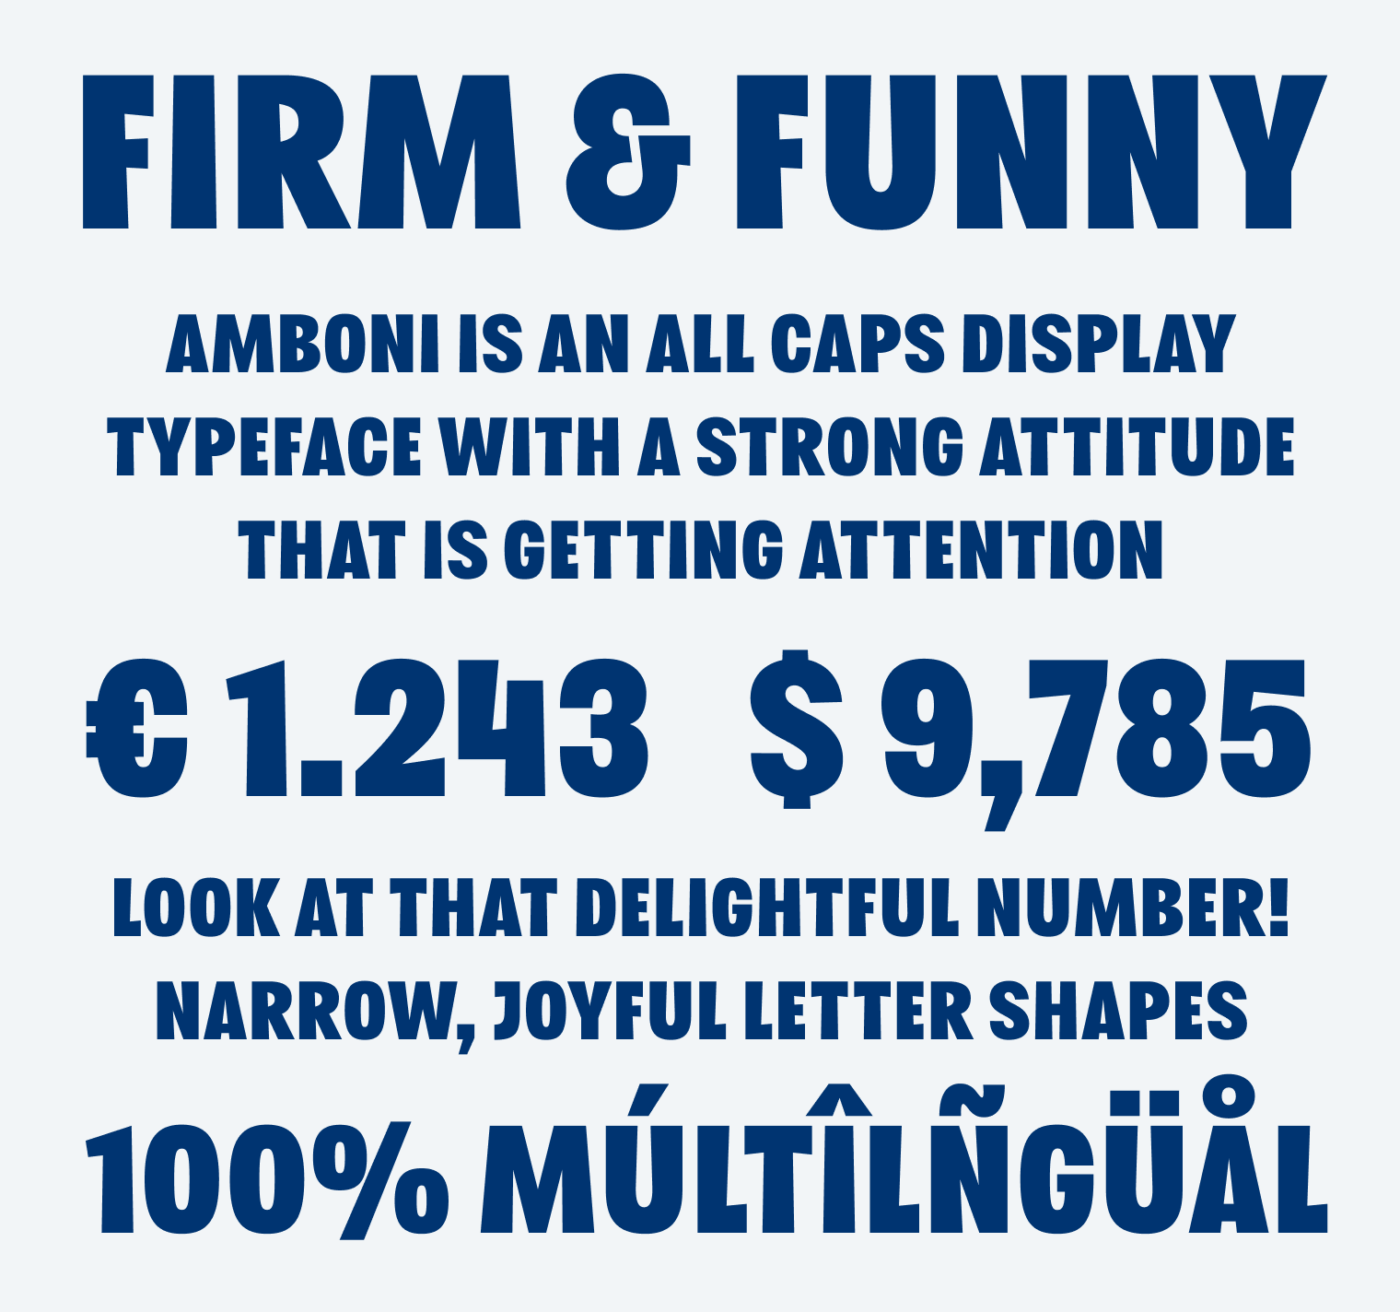 FIrm & Funny Amboni is an all caps display typeface with a strong attitude that is getting attention. Look at that Delightful number! narrow, Joyful letter shapes. 100% multilingual